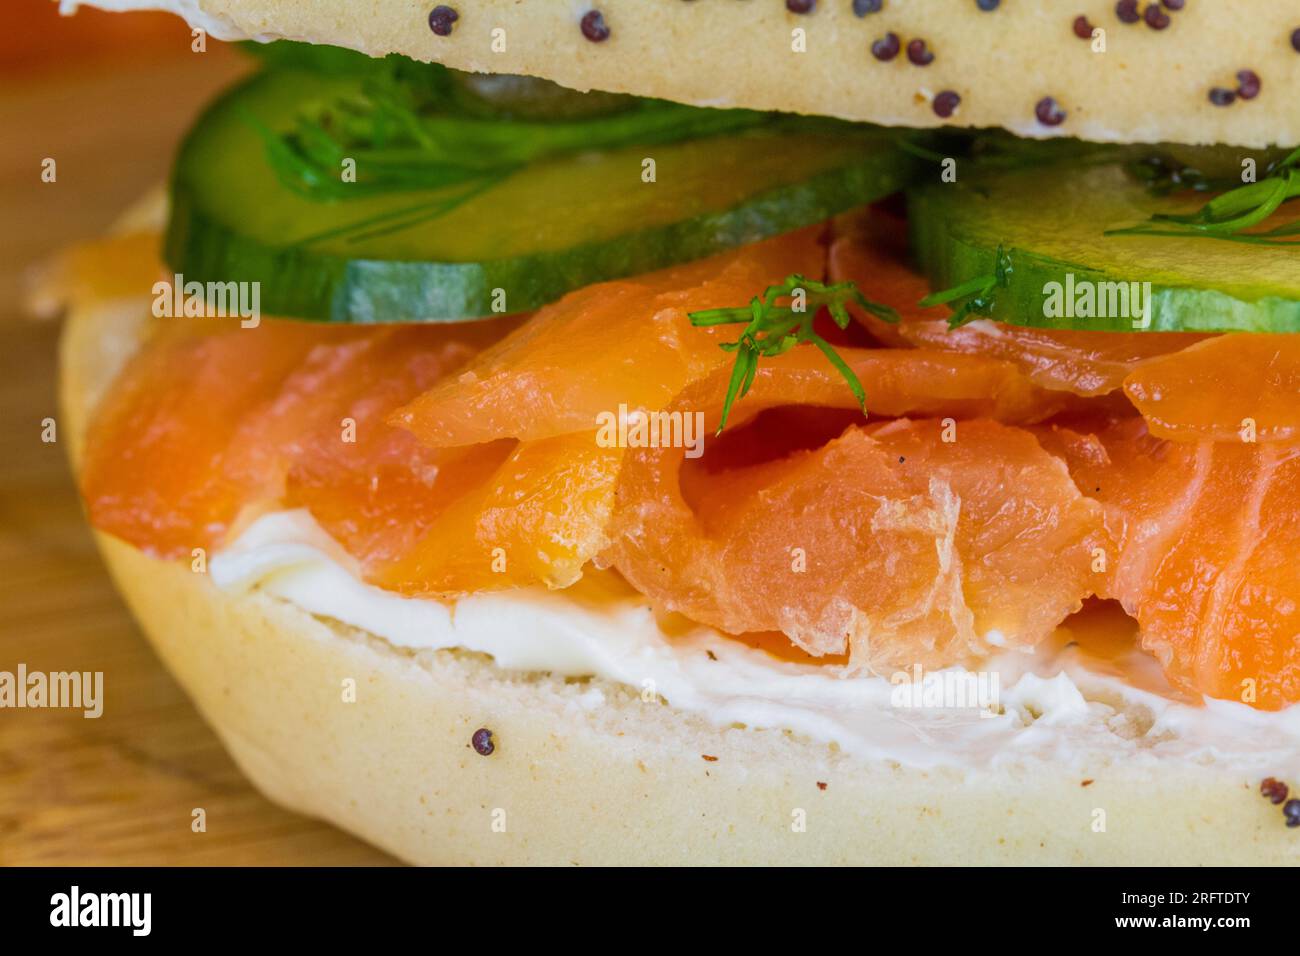 Seeded bagel with smoked salmon, cream cheese, cucumber, dill and capers on wooden board, landscape, macro. Stock Photo